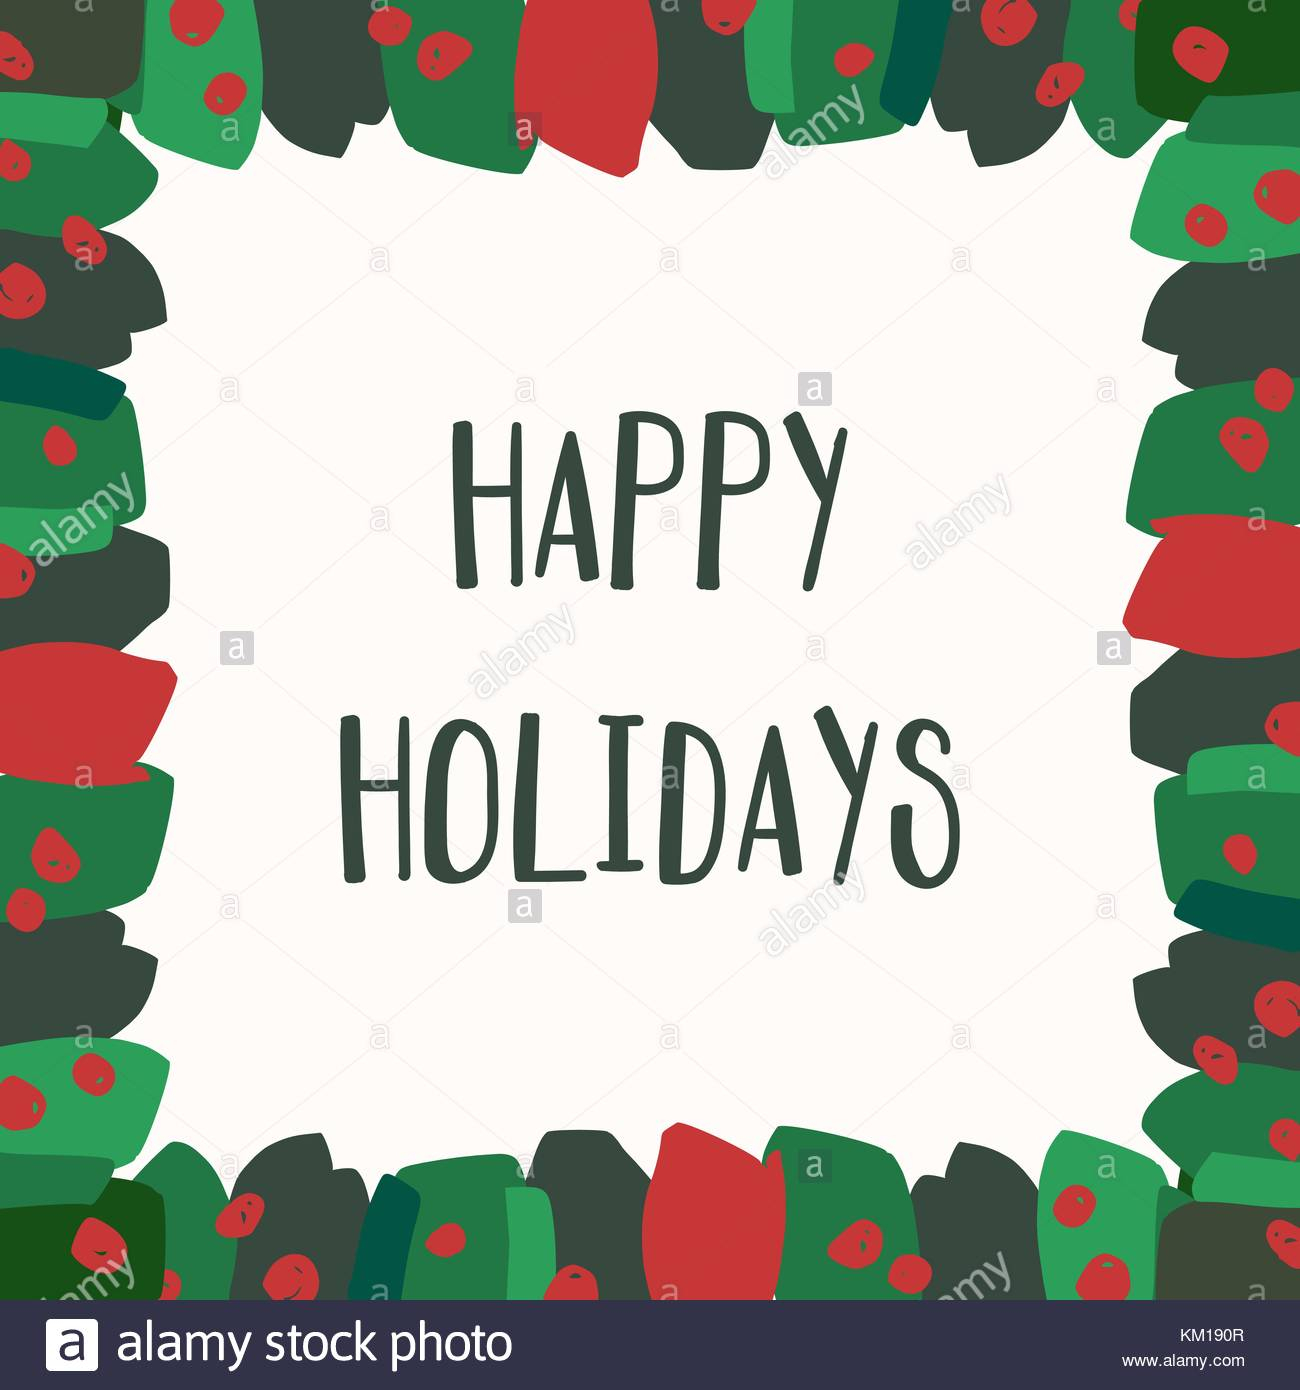 Christmas Greeting Card Template With Green And Red Regarding Happy Holidays Card Template